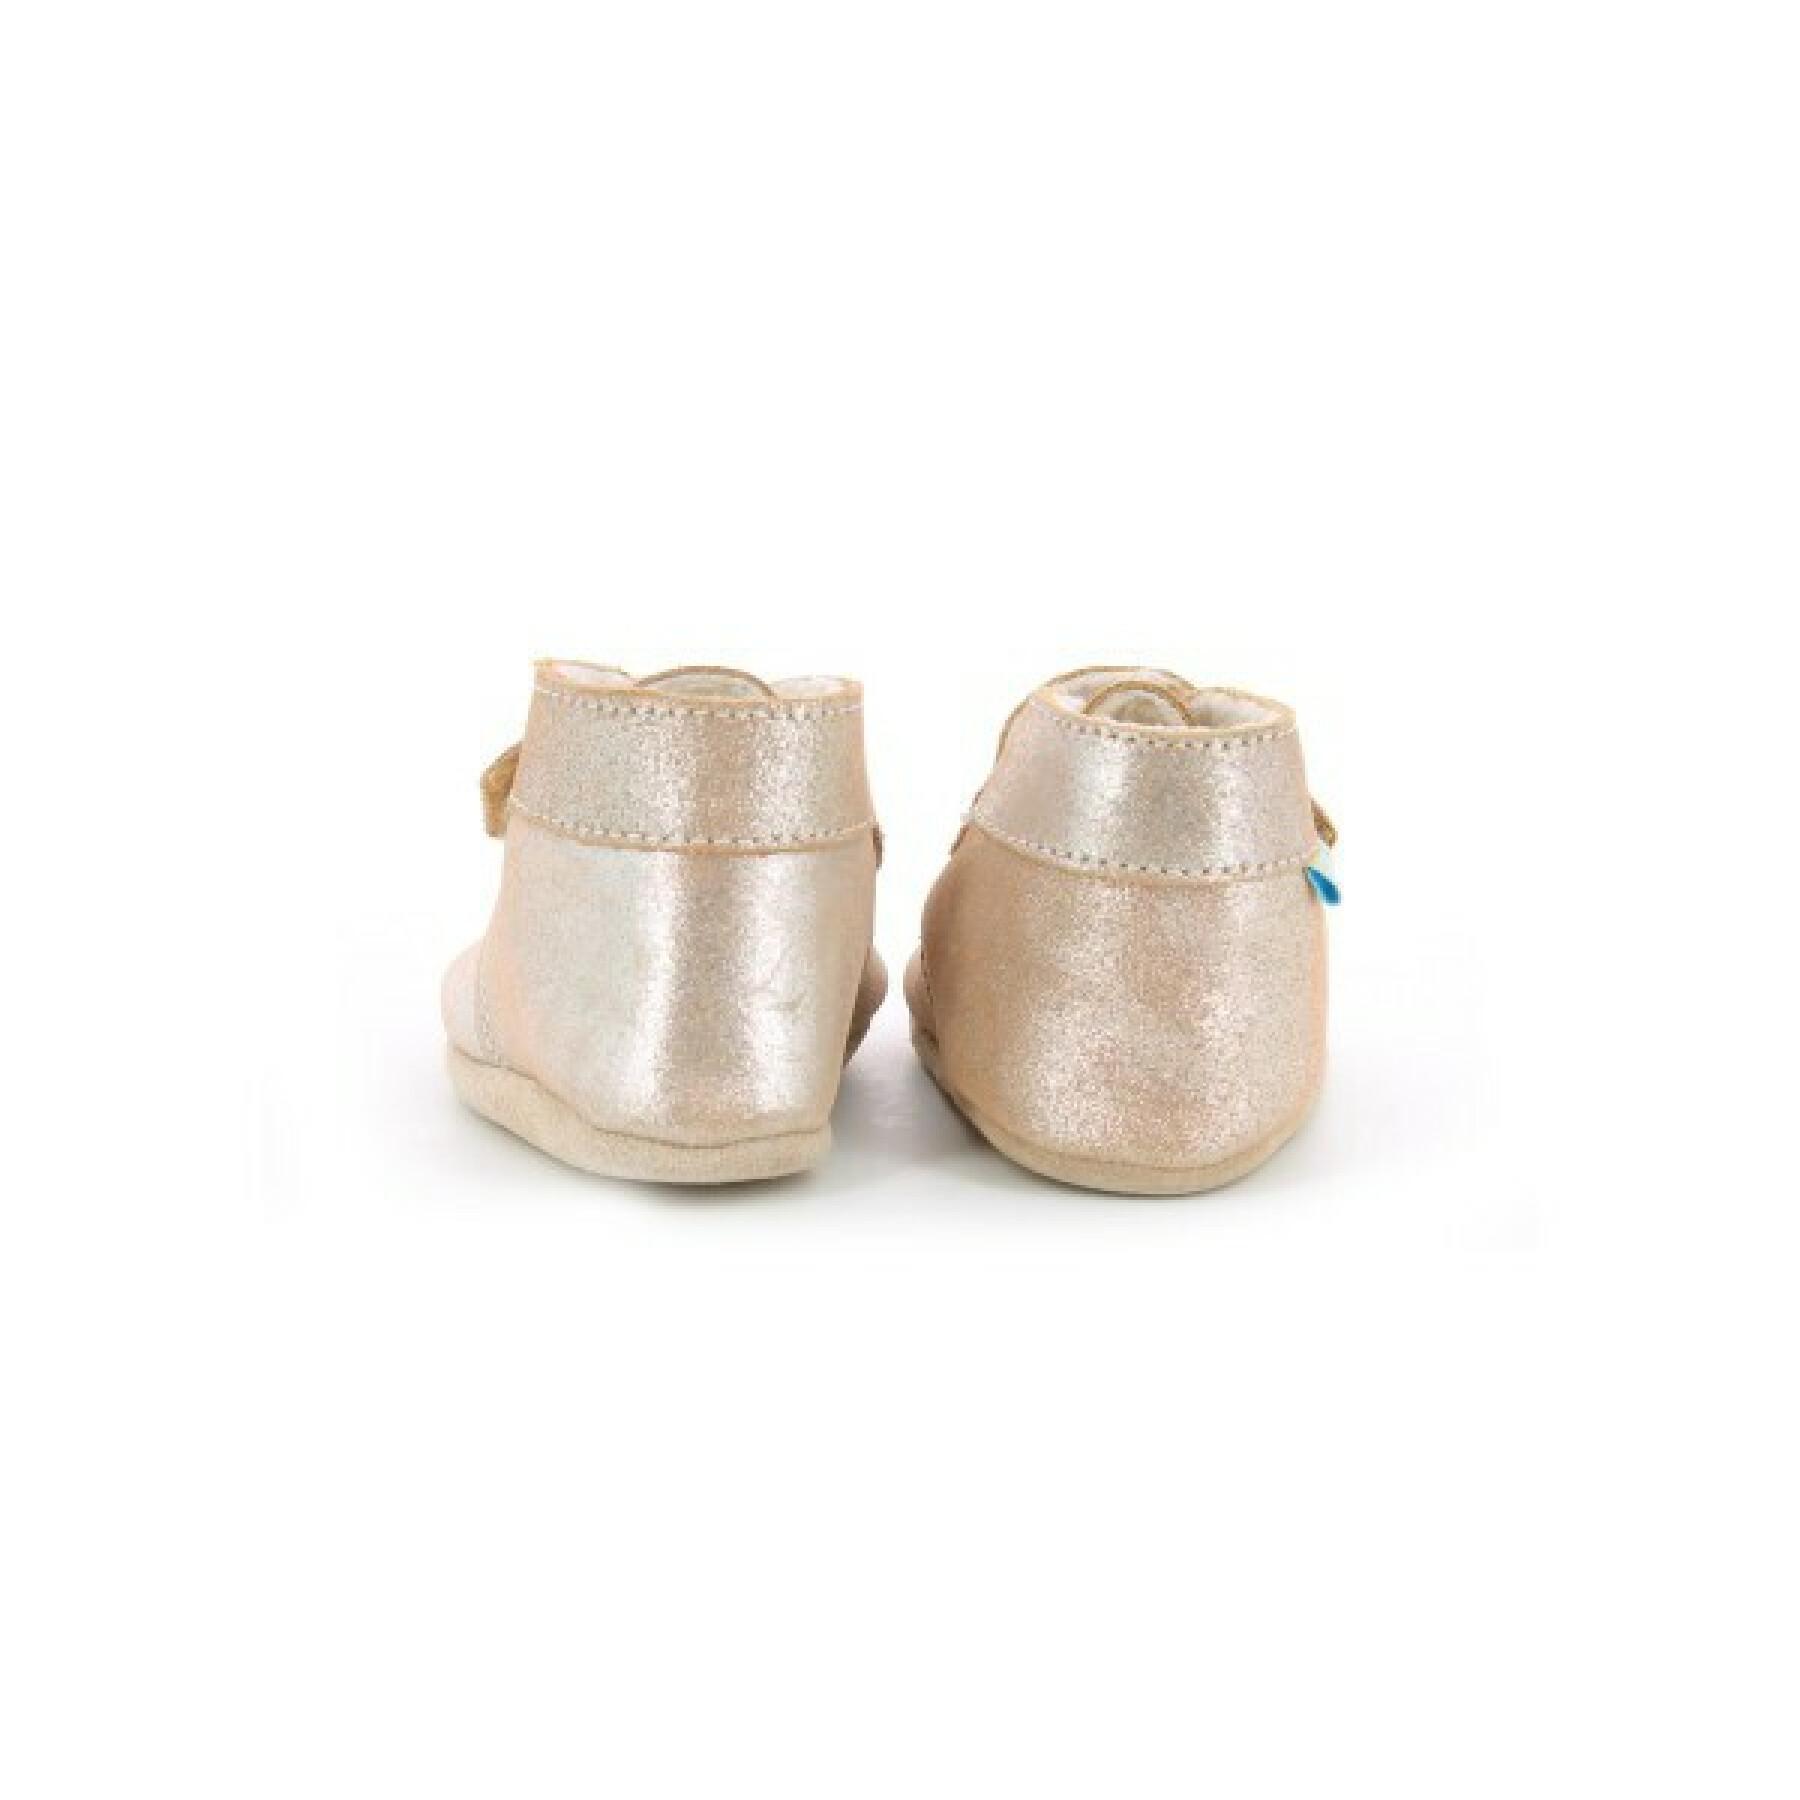 Chaussons enfant Robeez pole nord cho perm